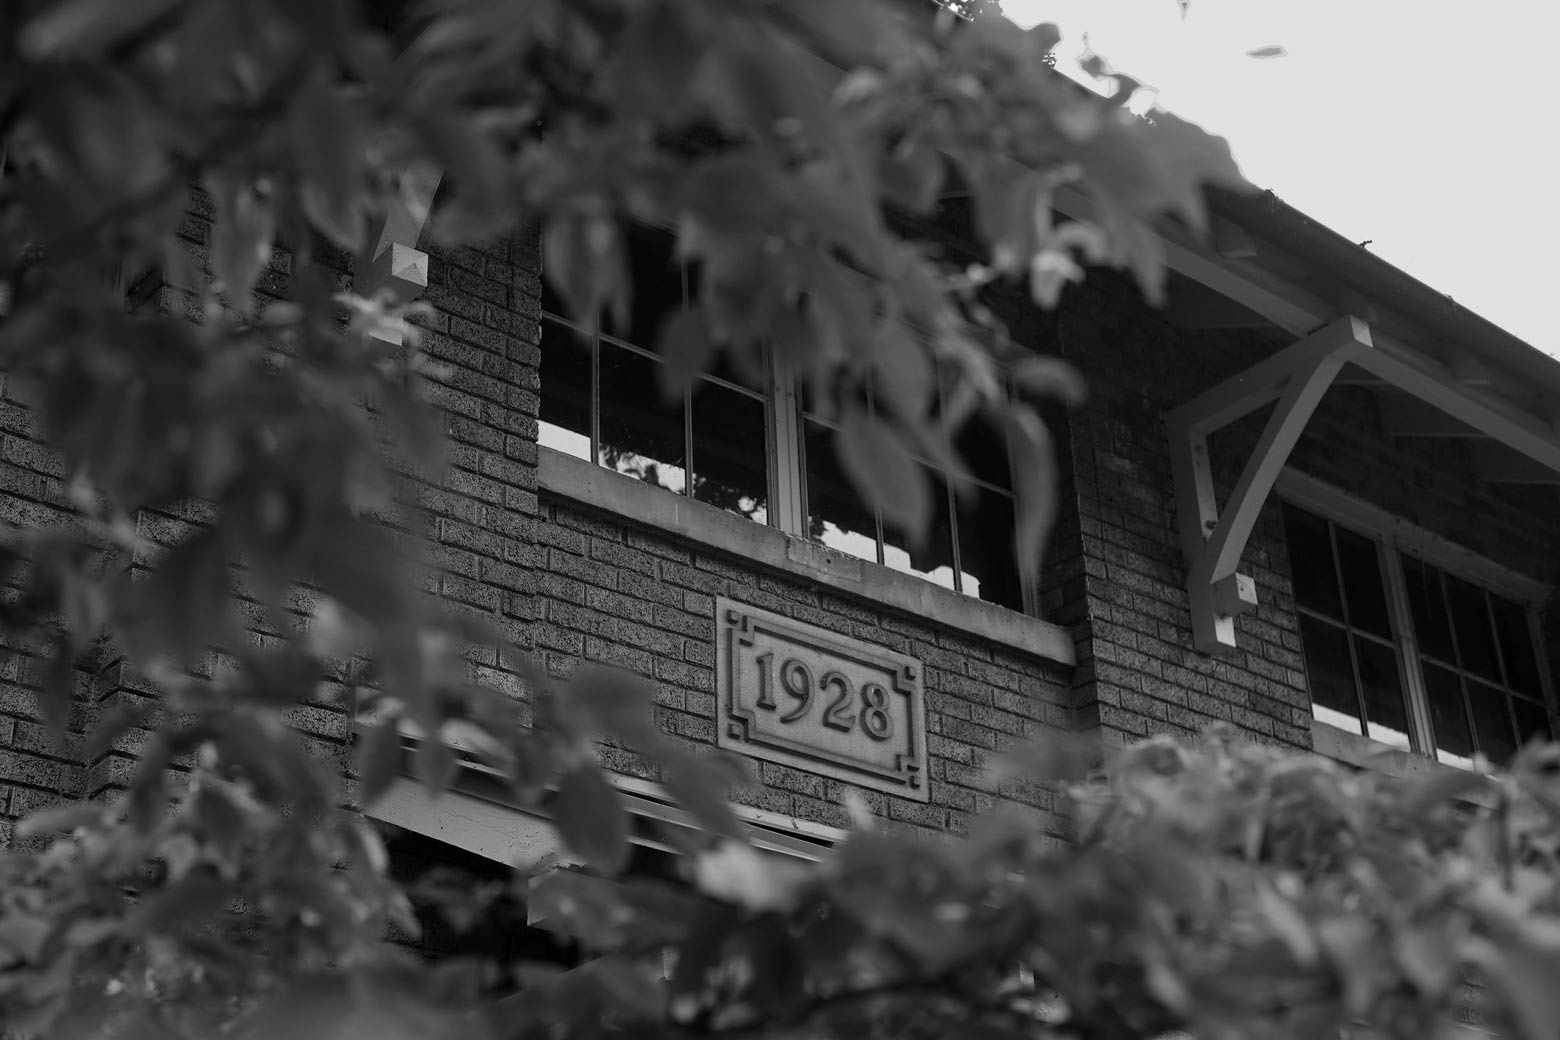 Grayscale image of the front of a brick building with the year '1928' seen through foliage